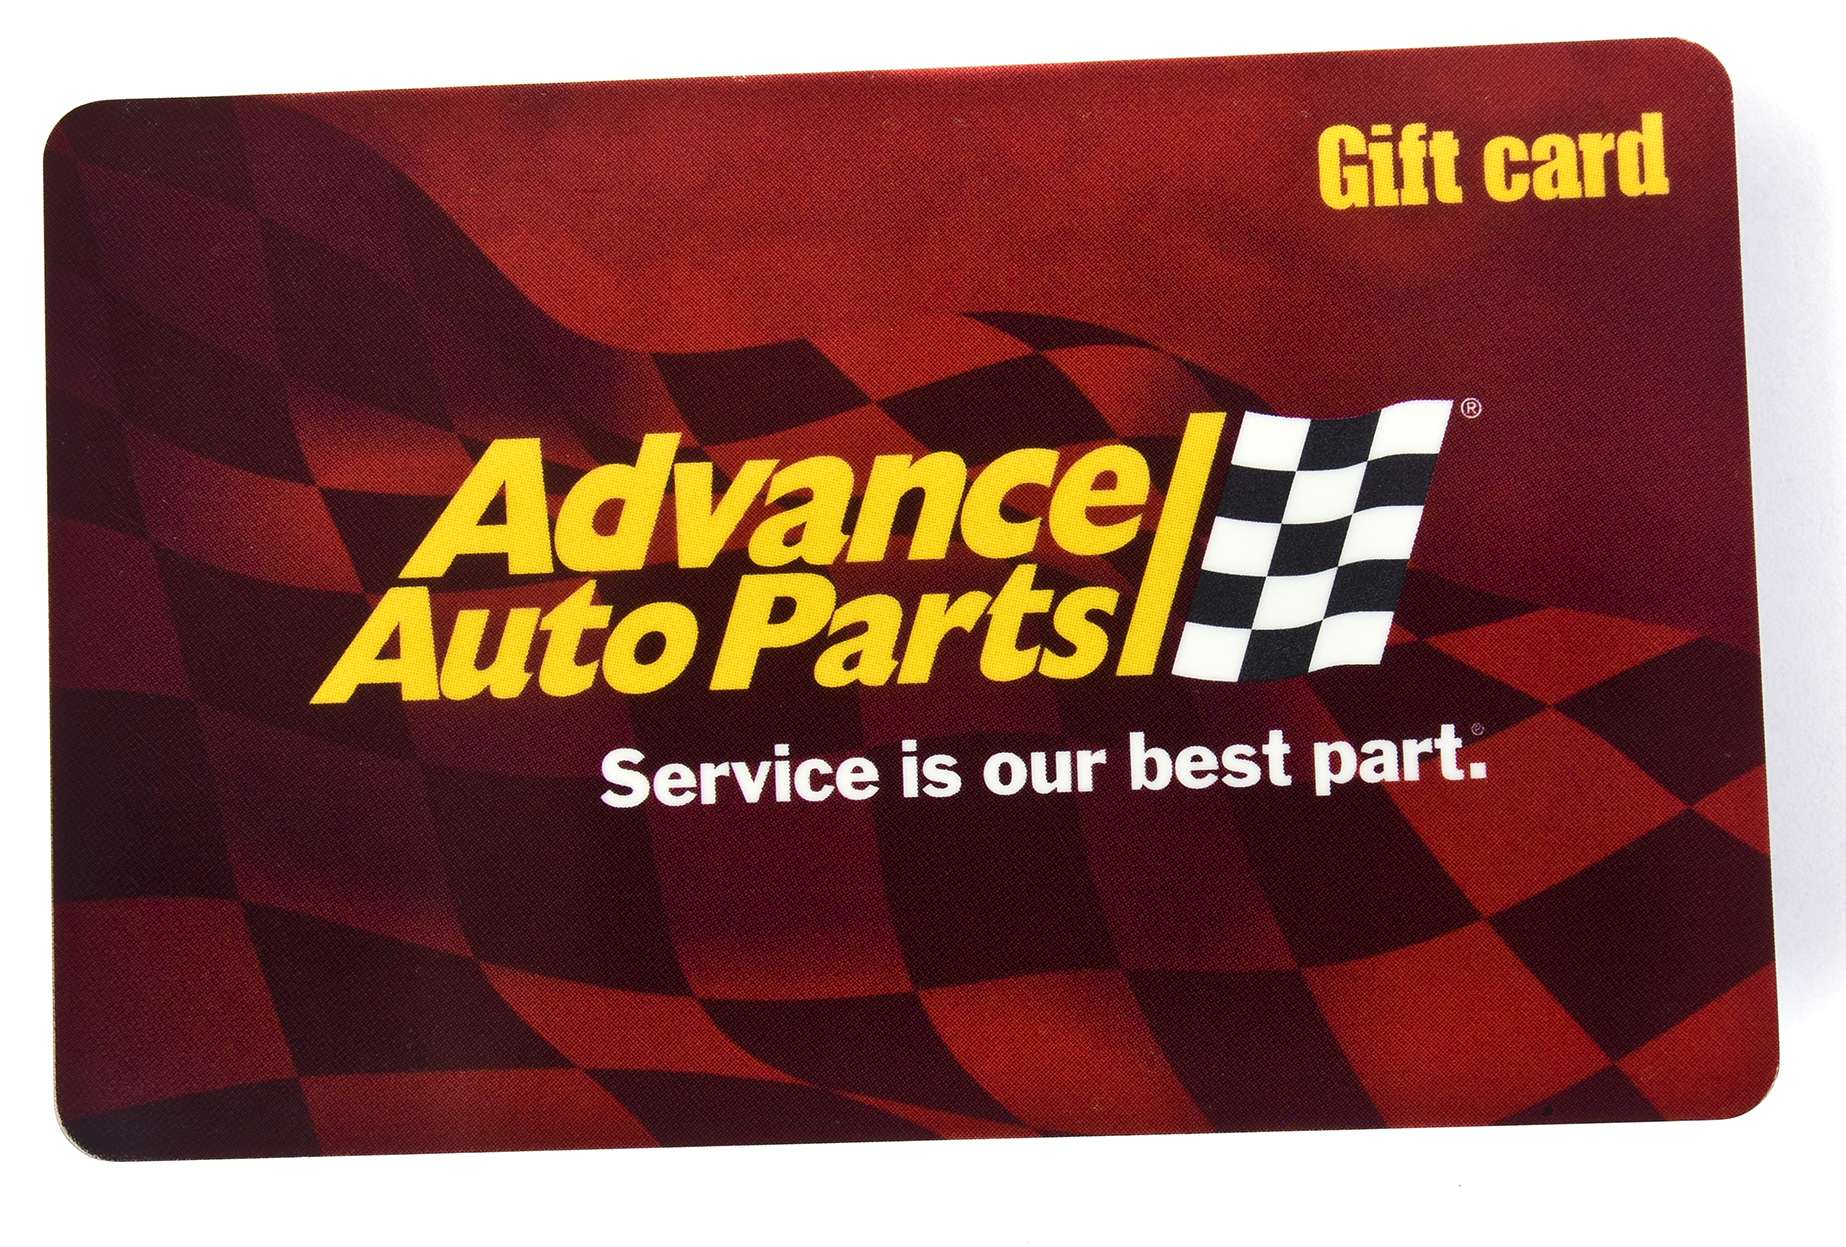 5 RUNNER-UP PRIZE WINNERS WILL RECEIVE<br>
â¢ A $200 gift card to Advance Auto Parts!<p>
Across the United States, Puerto Rico and the Virgin Islands, Advance Auto Parts serves millions of customers in thousands of stores. Each one of our Team Members is dedicated to giving you great service, regardless of your automotive needs. We pride ourselves on stocking quality parts that are available when you need them to help you get back on the road.